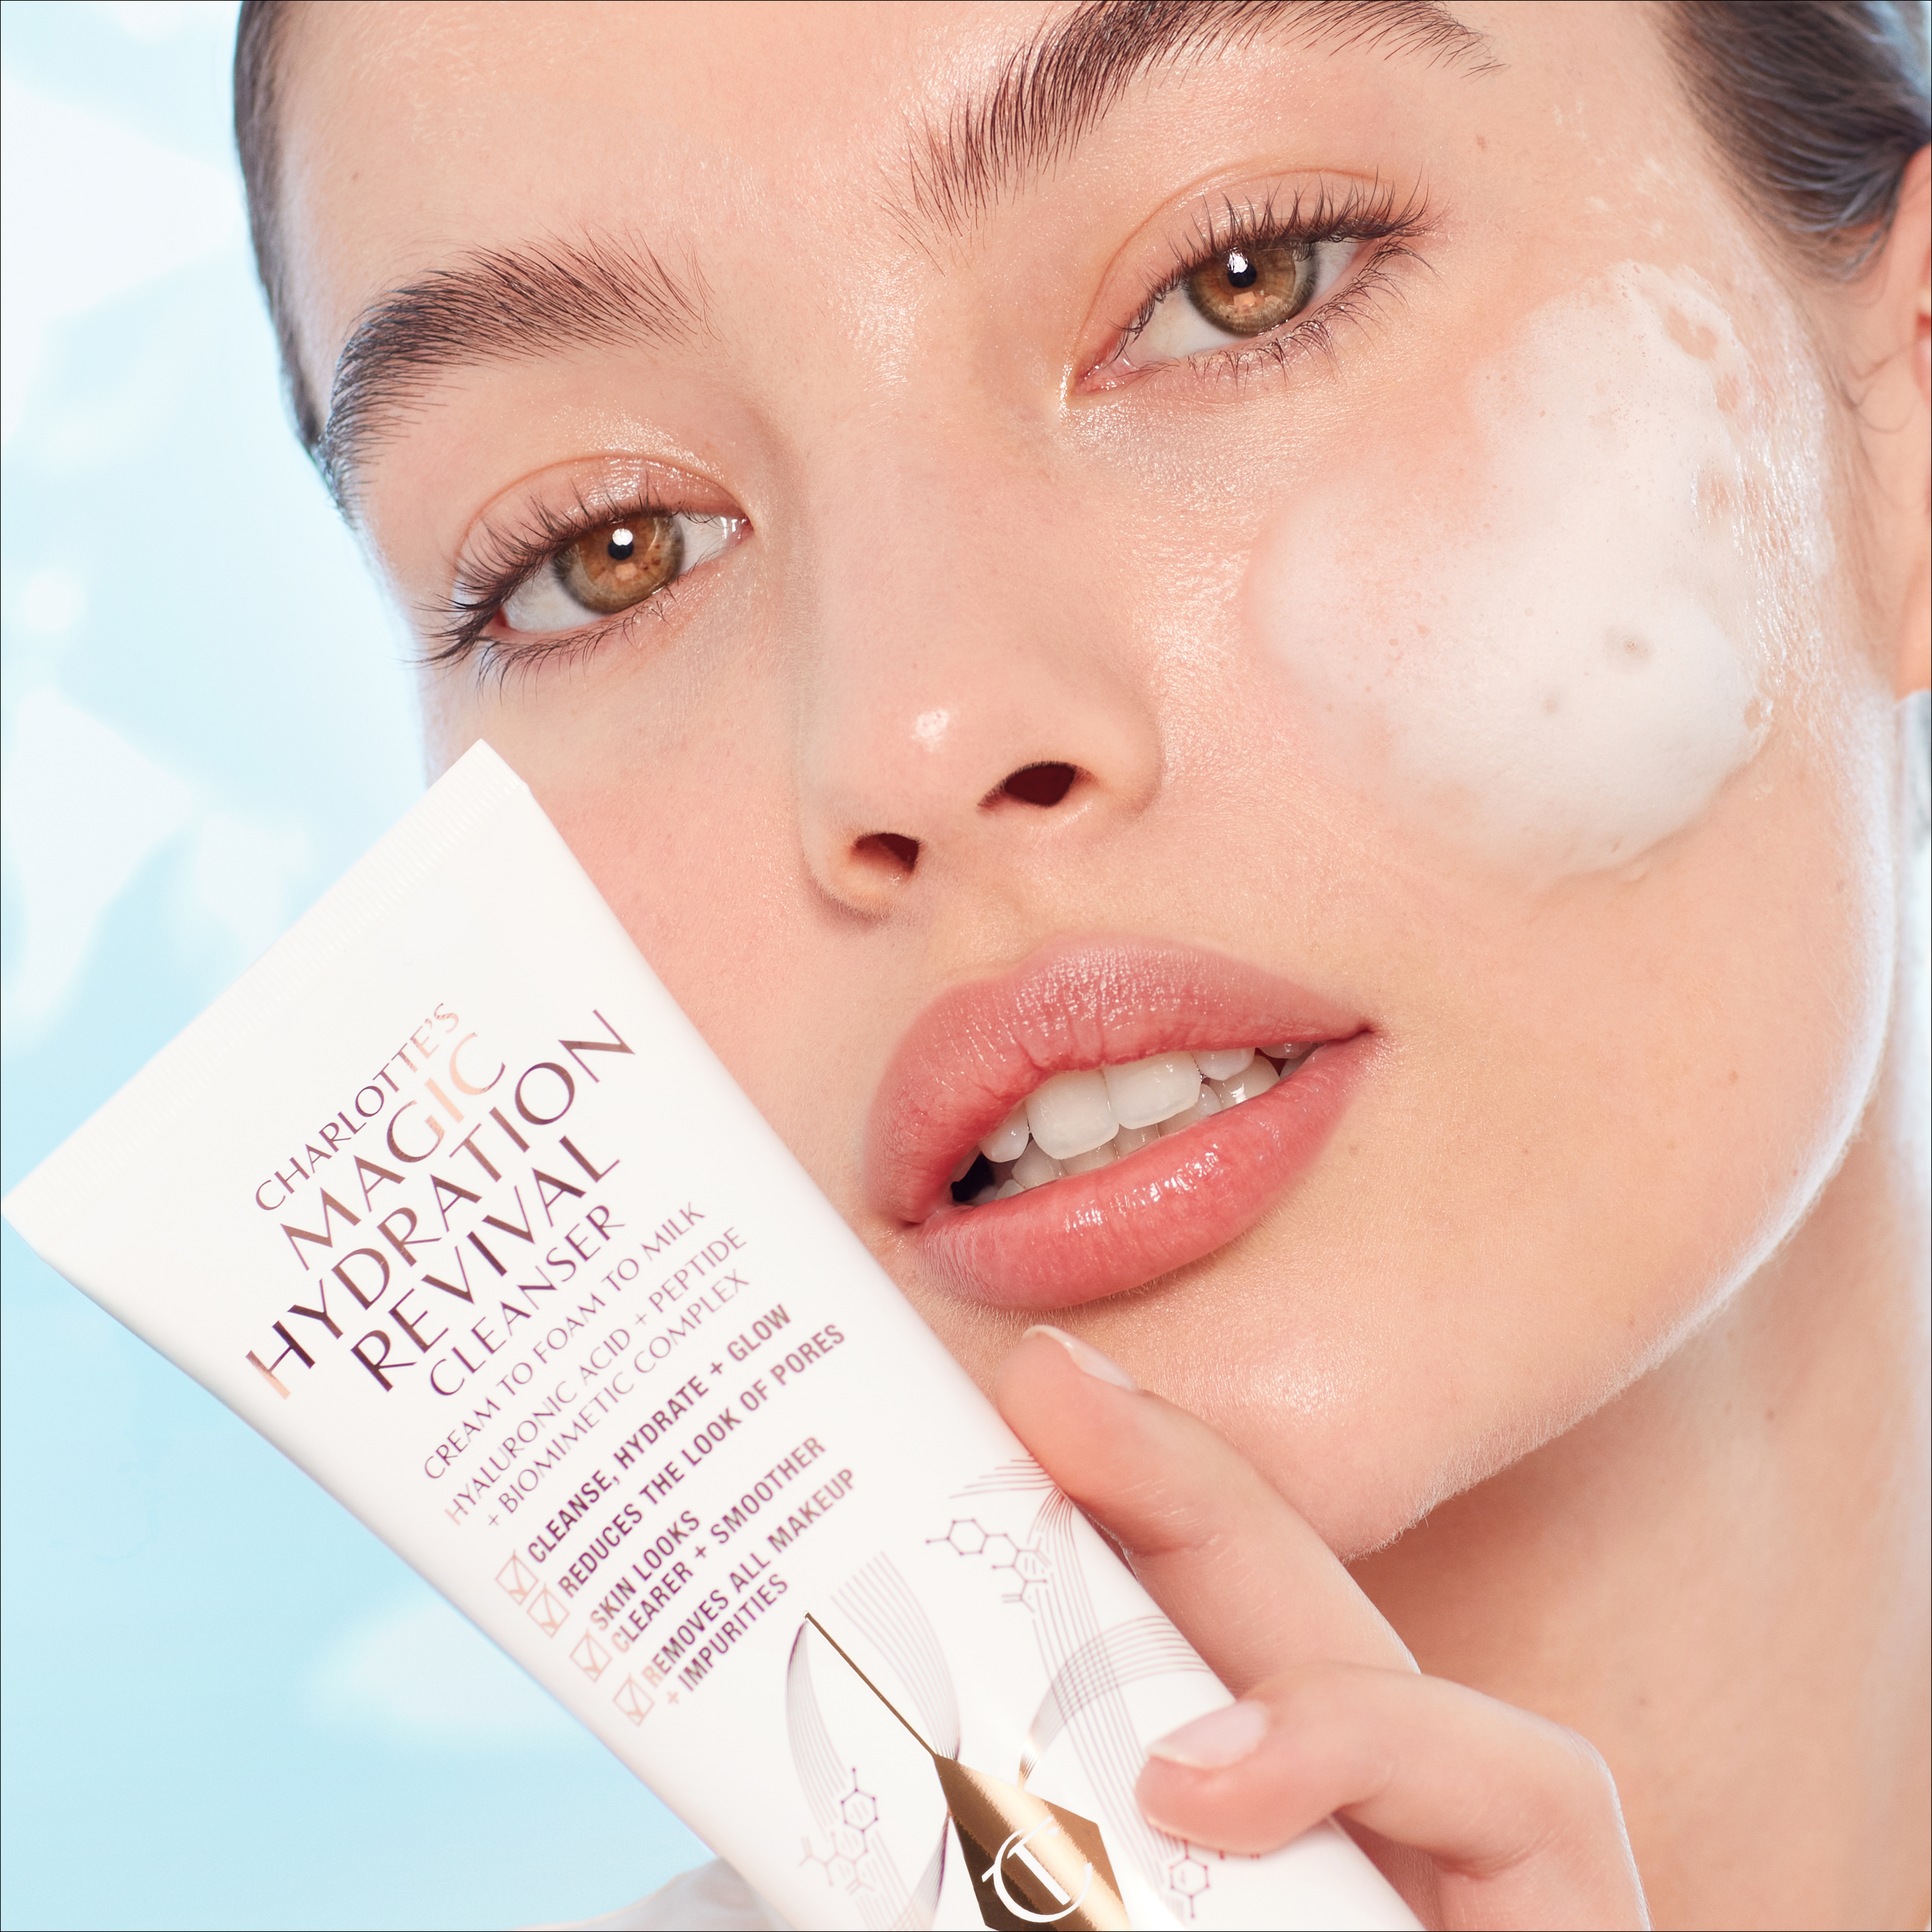 Magic Hydration Revival Cleanser application